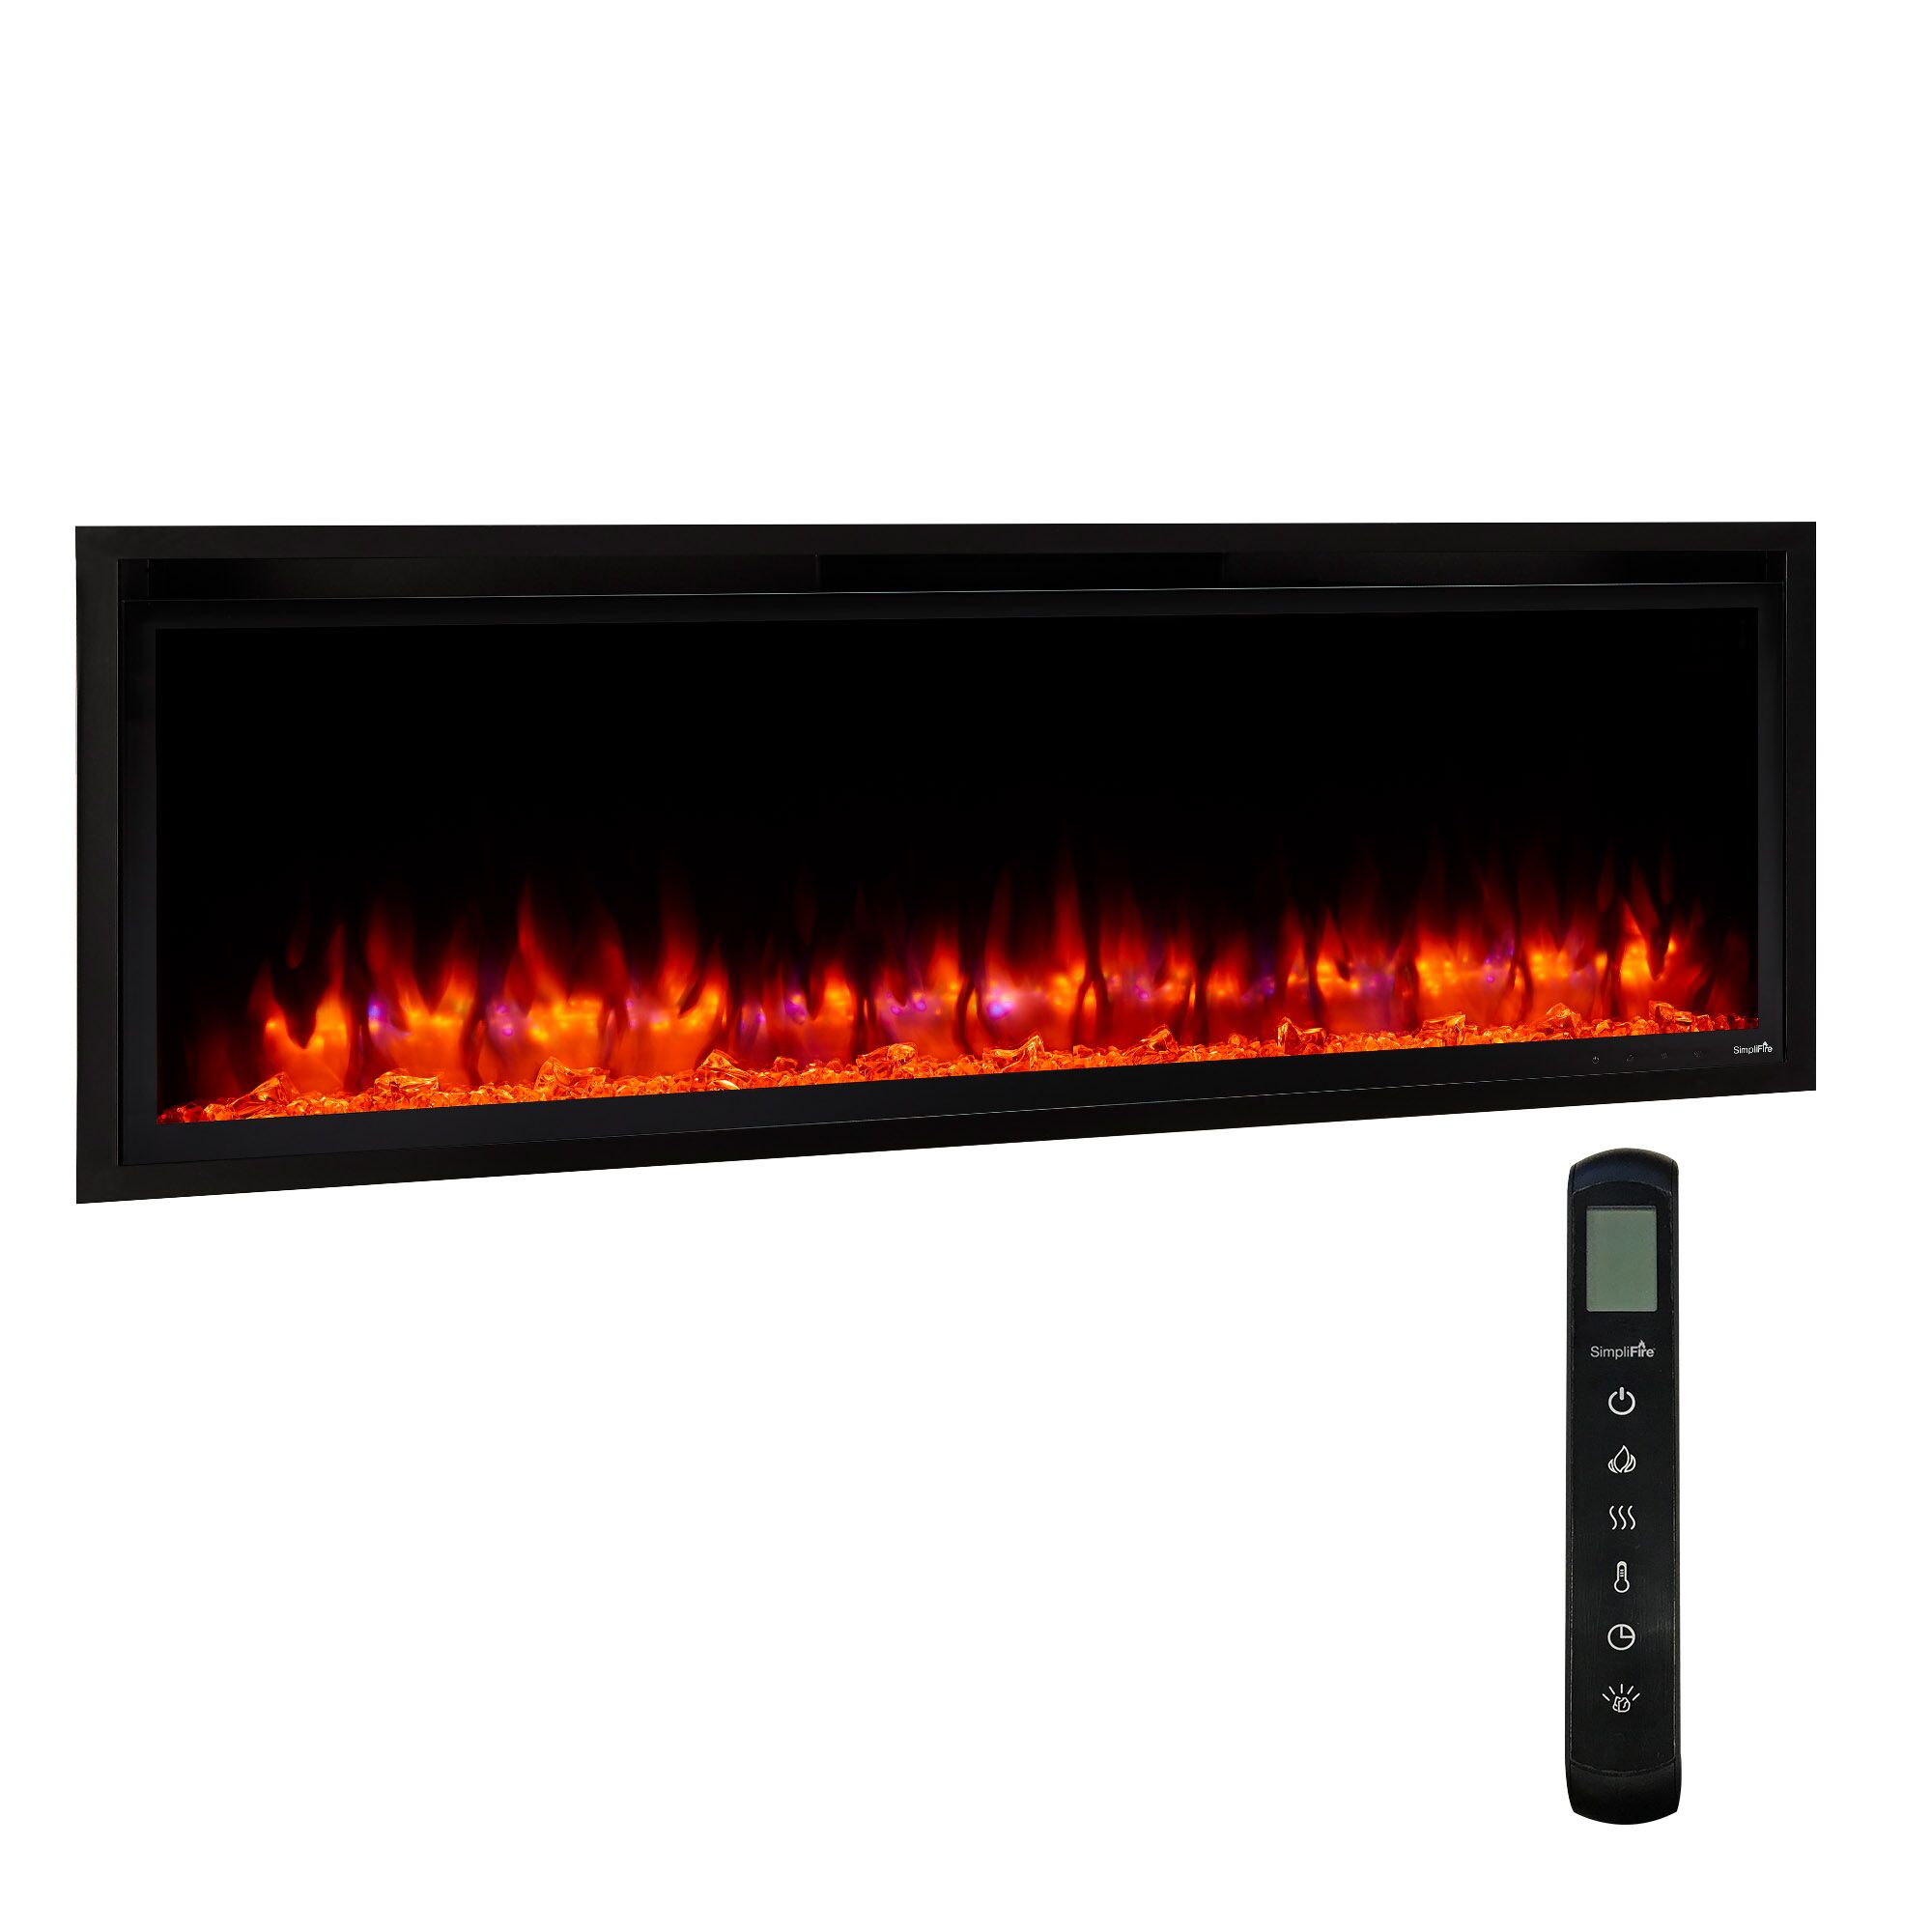 50 inch allusion platinum electric fireplace product image